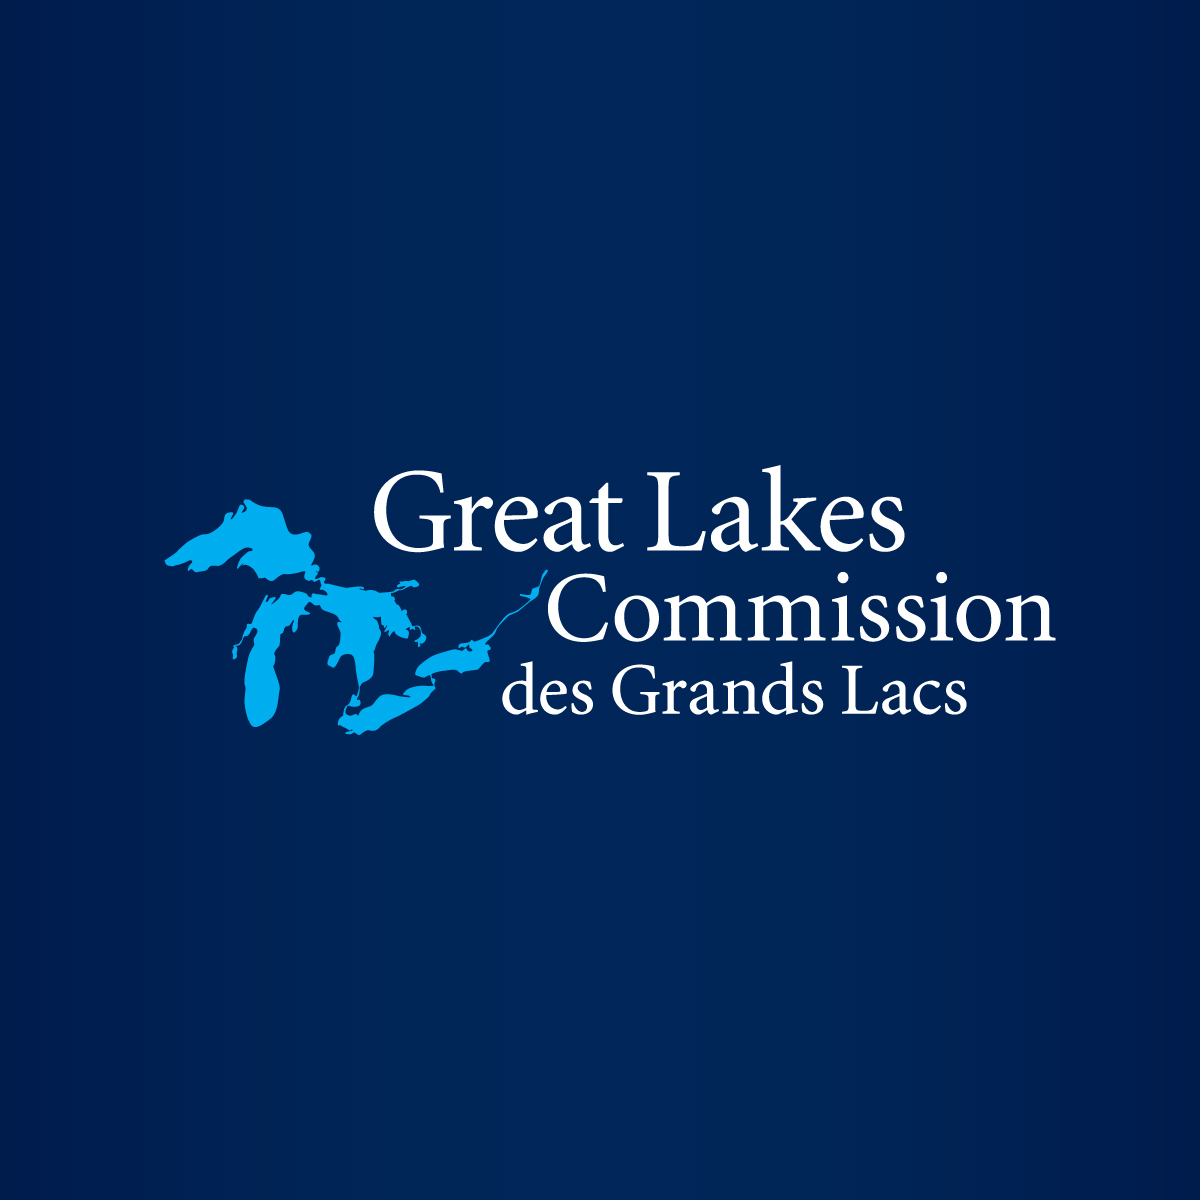 Great Lakes Compact protects water access. But that doesn’t mean thirsty neighbors won’t challenge it.